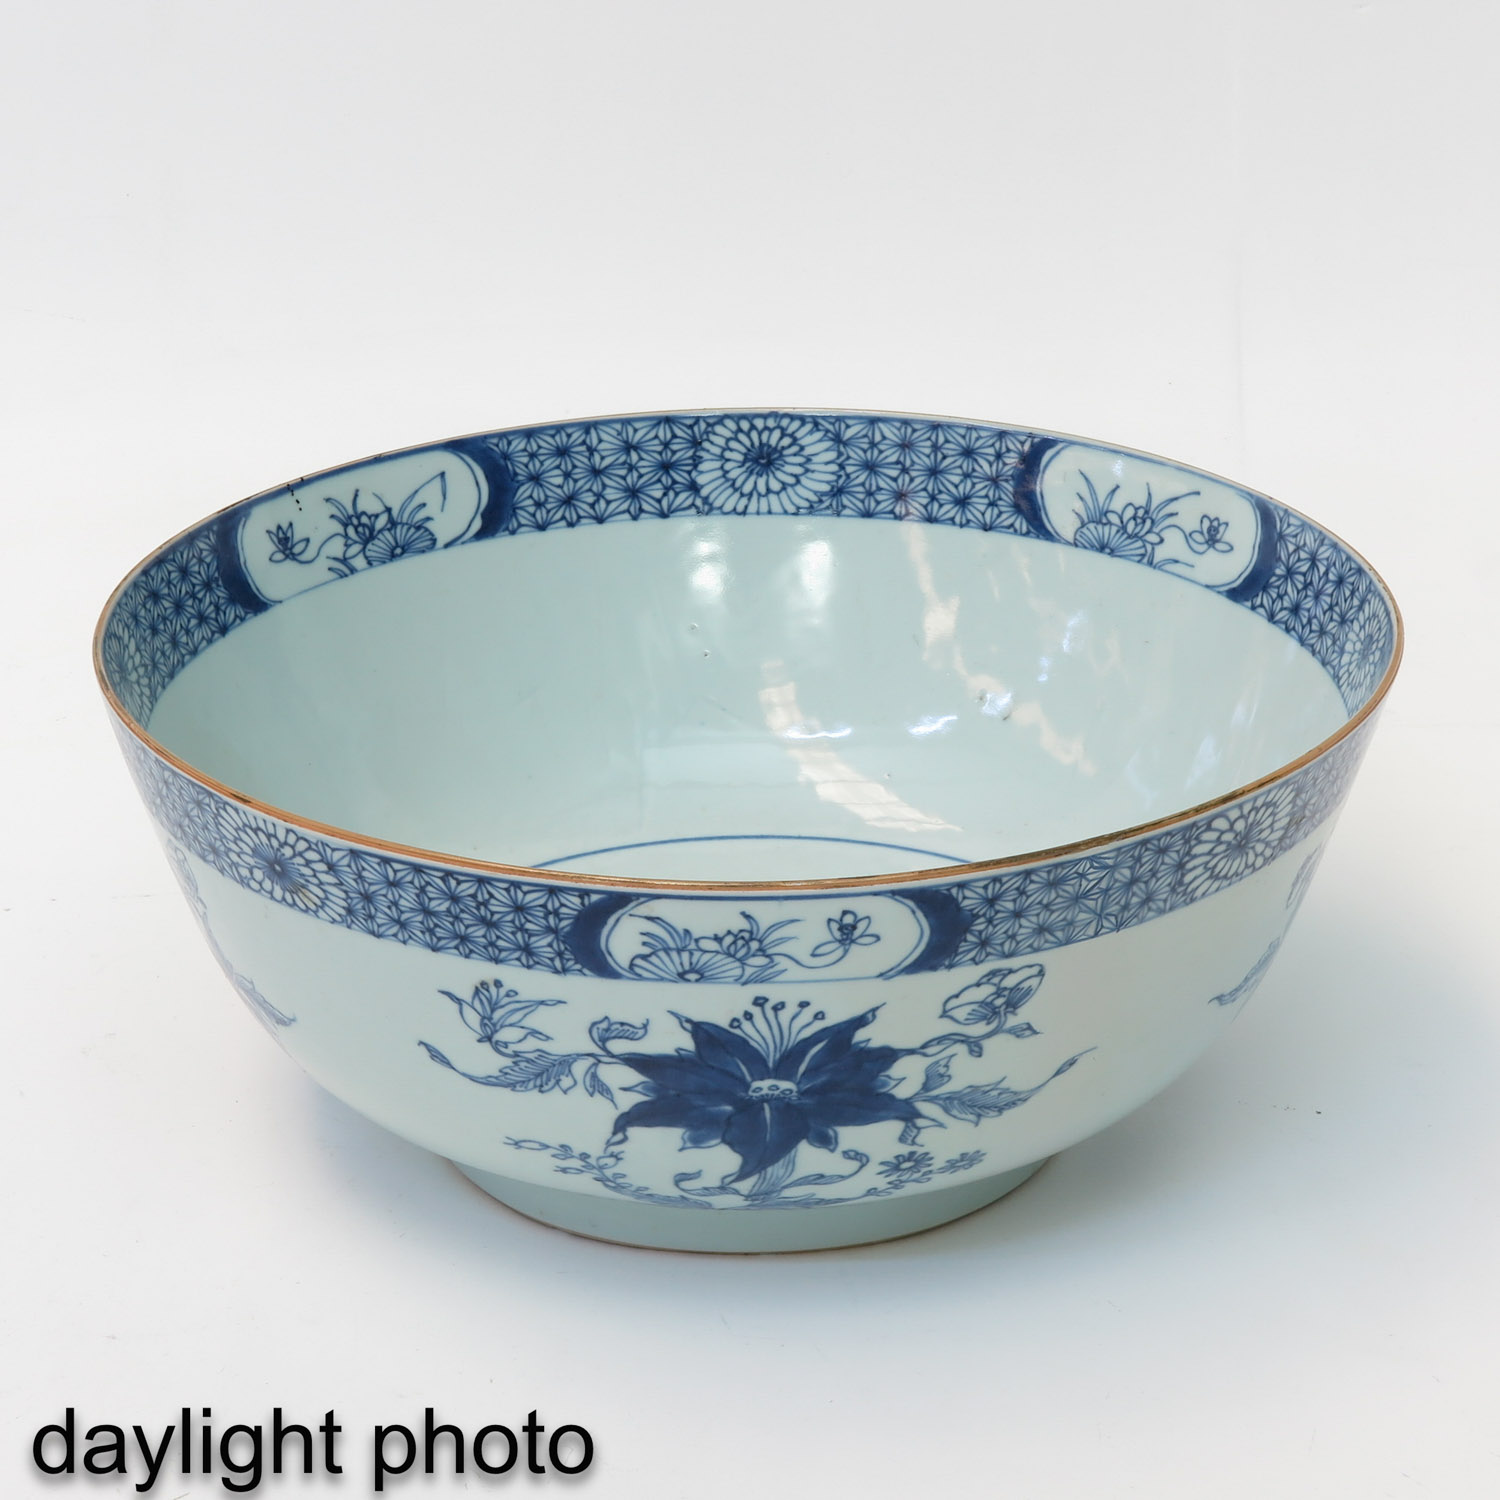 A Large Blue and White Serving Bowl - Image 7 of 9